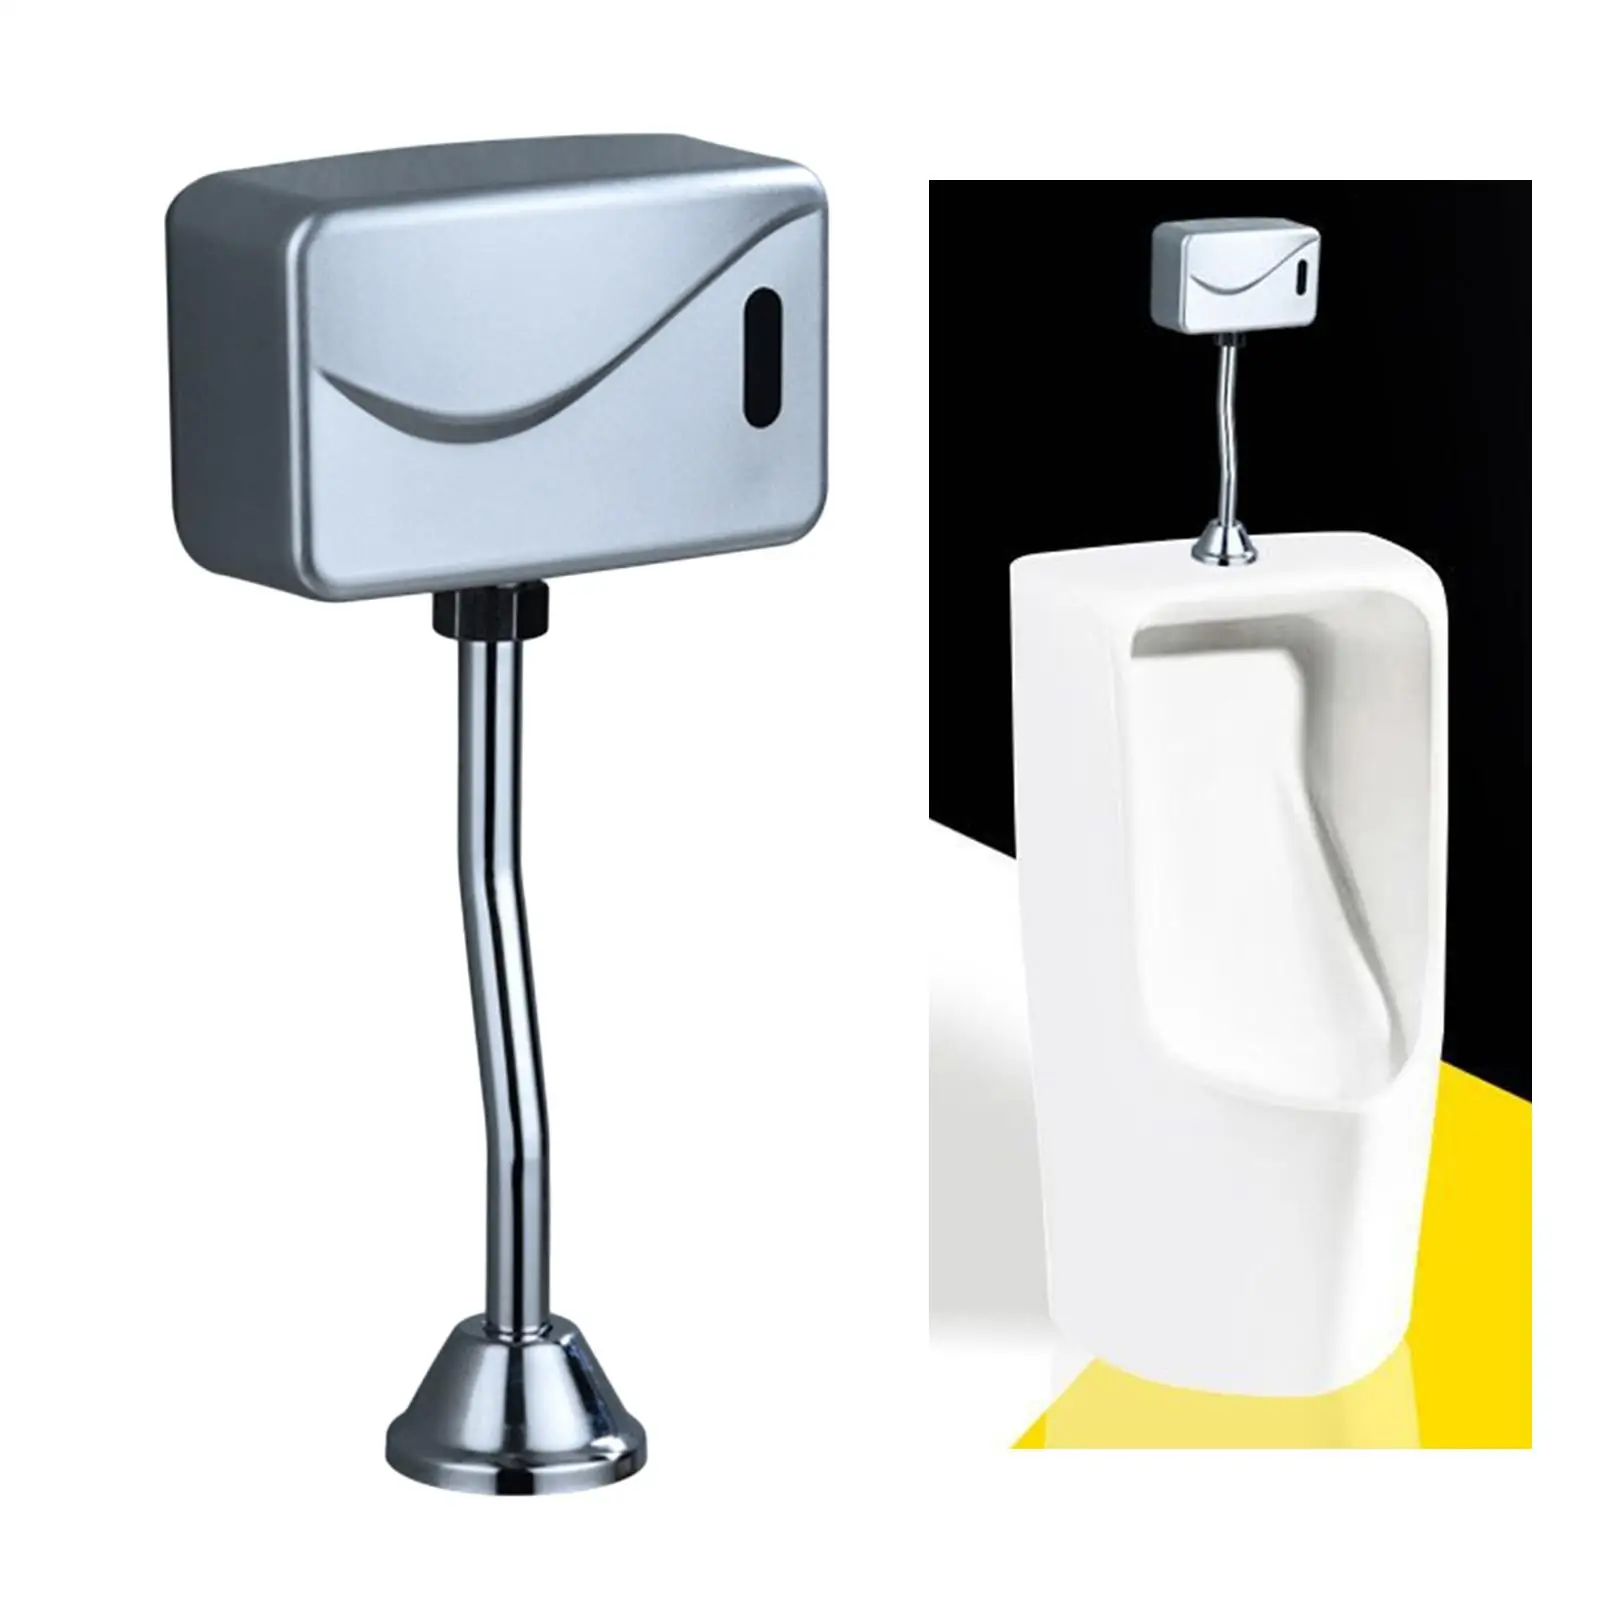 Automatic Urinal Flush Valve Wall Mounted Touch-Less Urinal Flush Valve Bathroom Toilet Home Kit Hose Controller Tank